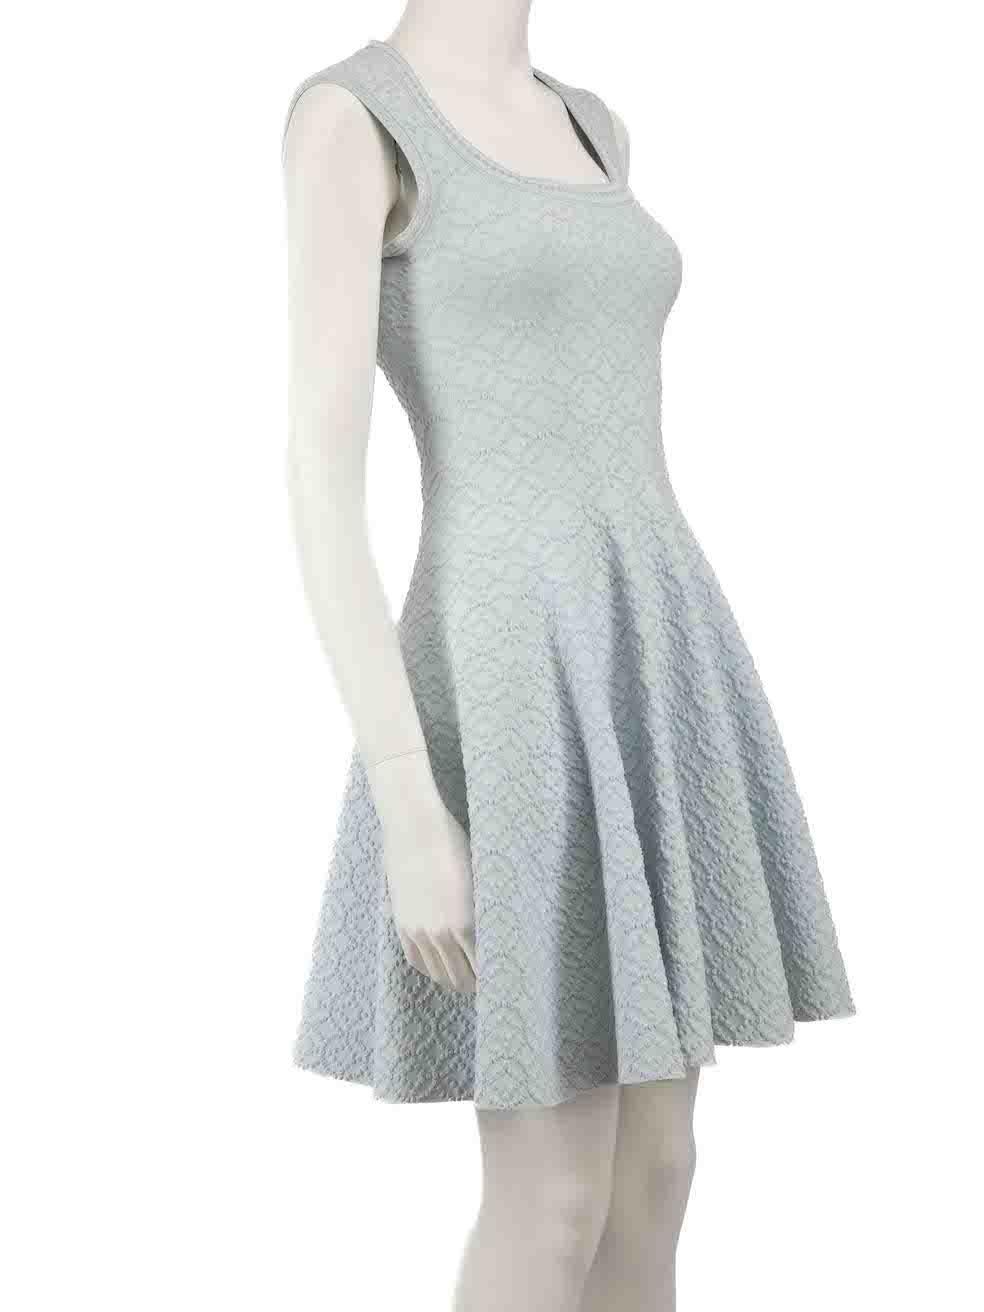 CONDITION is Very good. Minimal wear to dress is evident. Minimal pulls to fabric on bust and near hips due to fabric stretch and light discolouration to inner under arms on this used Alaïa designer resale item. Discolouration may need gentle hand